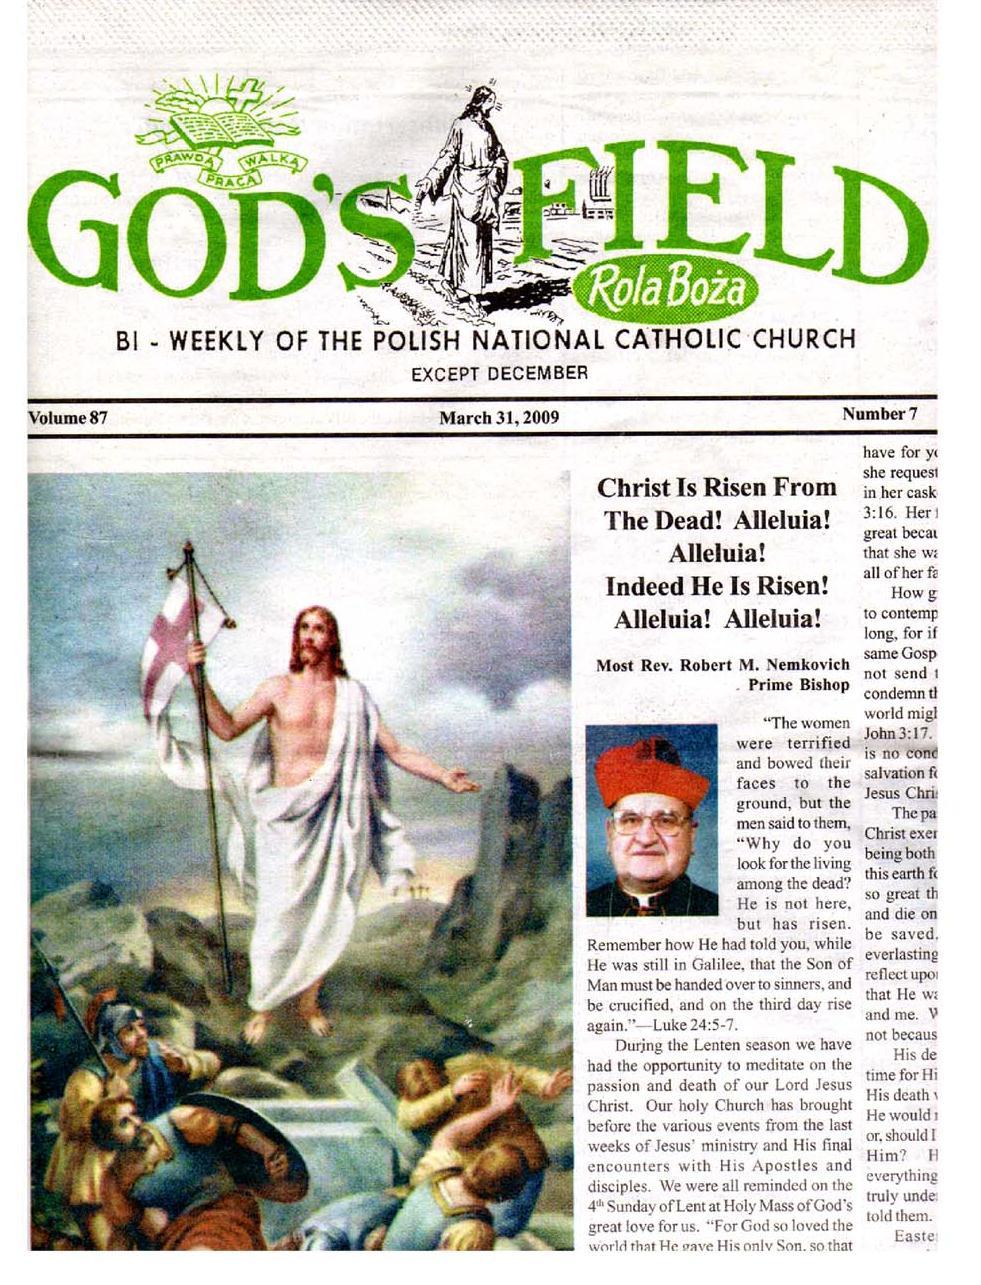 God s Field another means of communication in the growing PNCC In